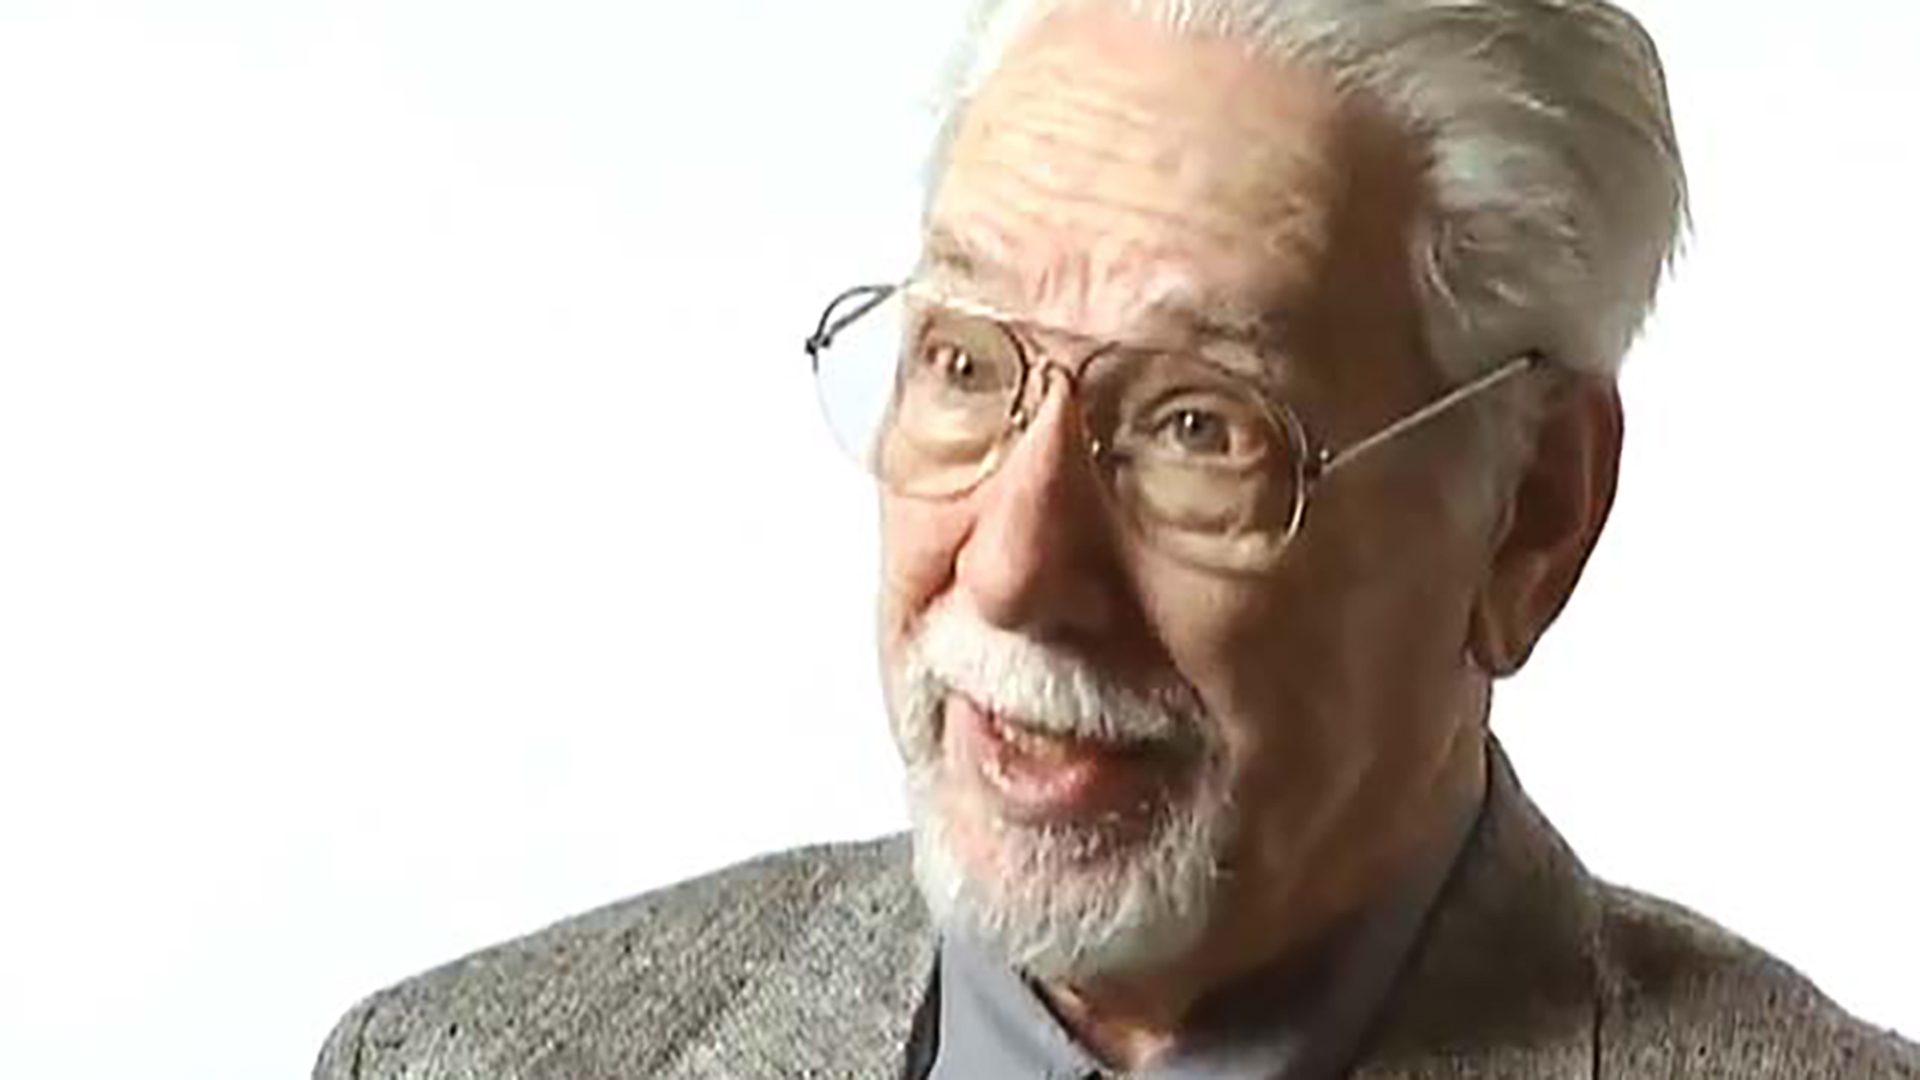 An expressive senior man with glasses and facial hair is interviewed against a white background.